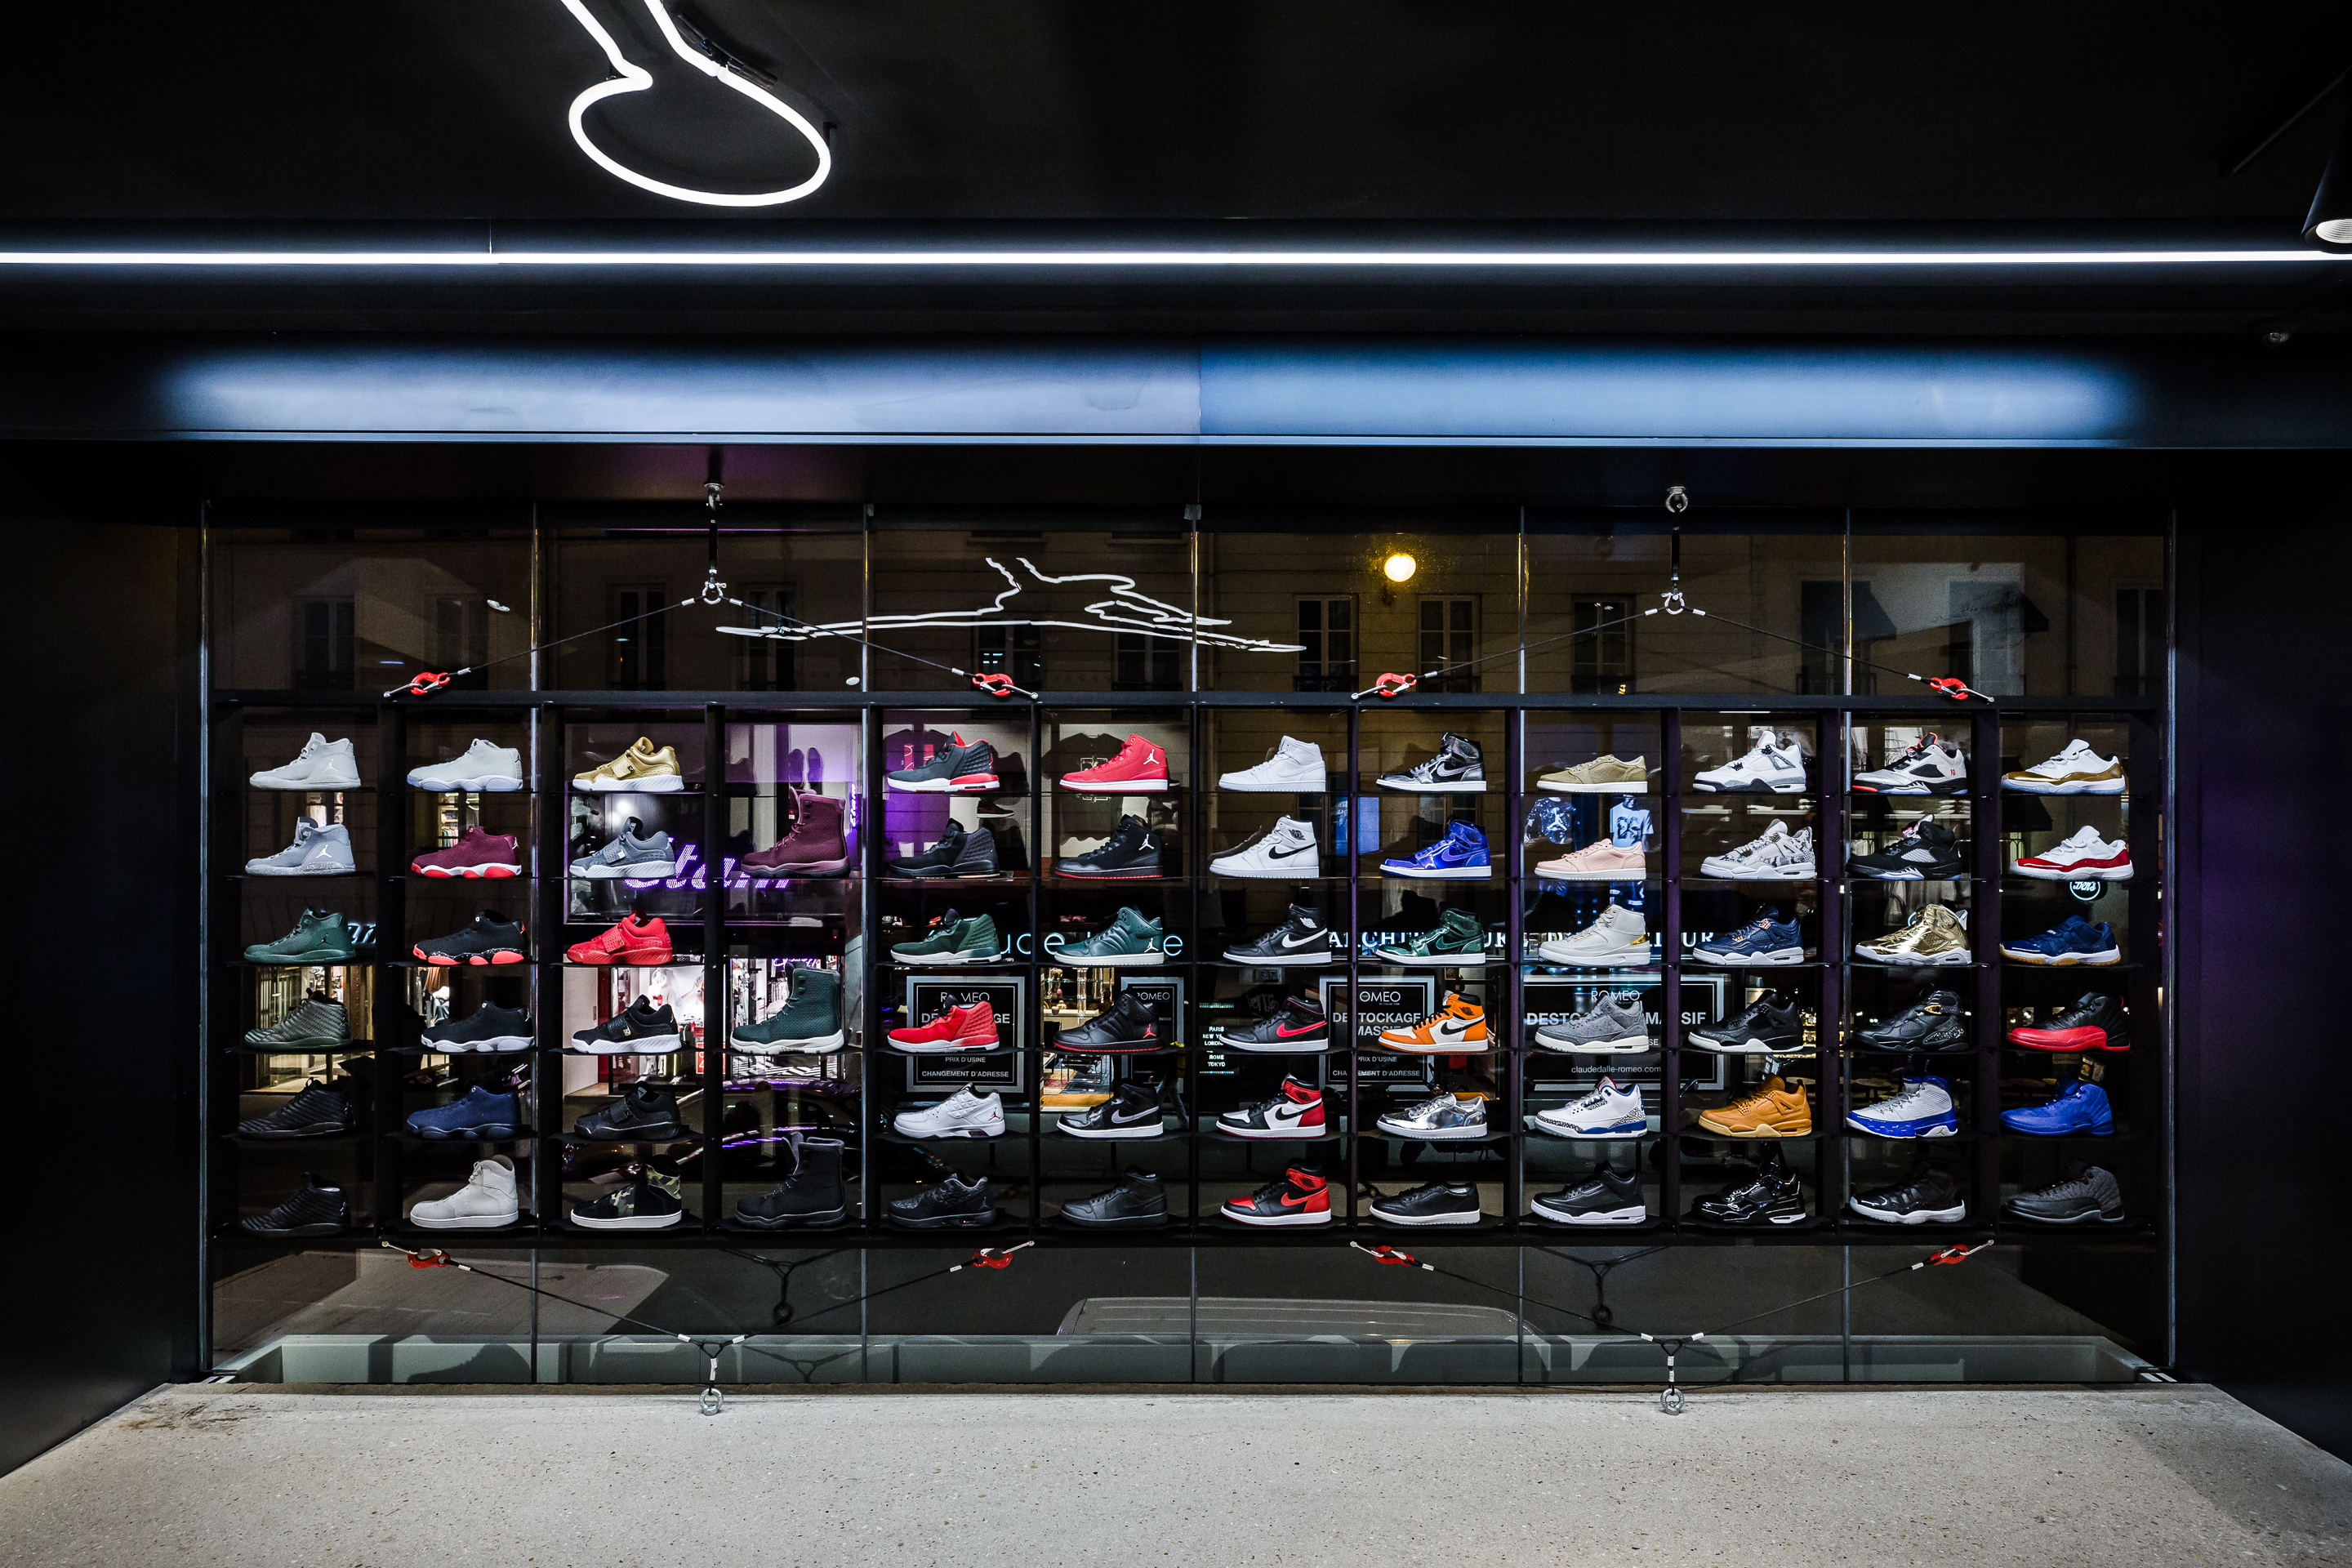 Go Inside the First-Ever Air Jordan Store in Europe | Complex